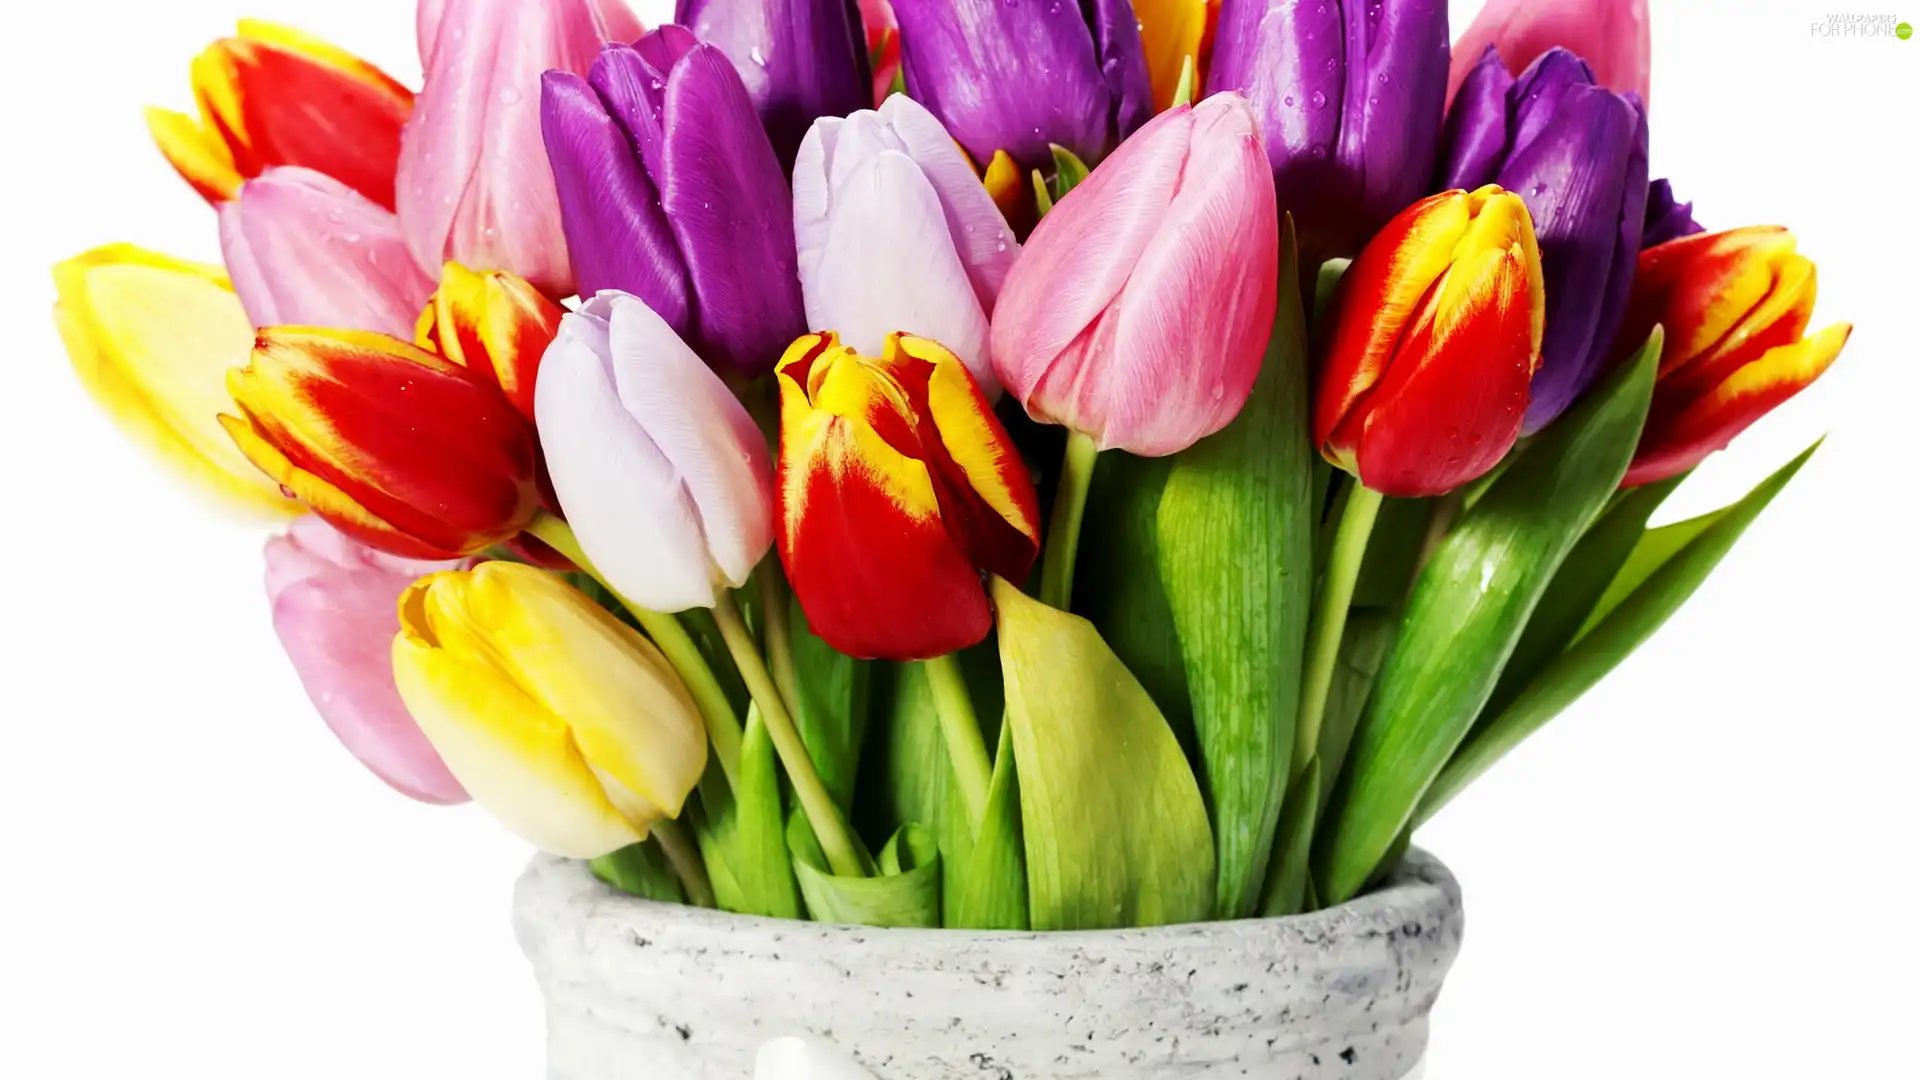 Tulips, Vase, Different colored